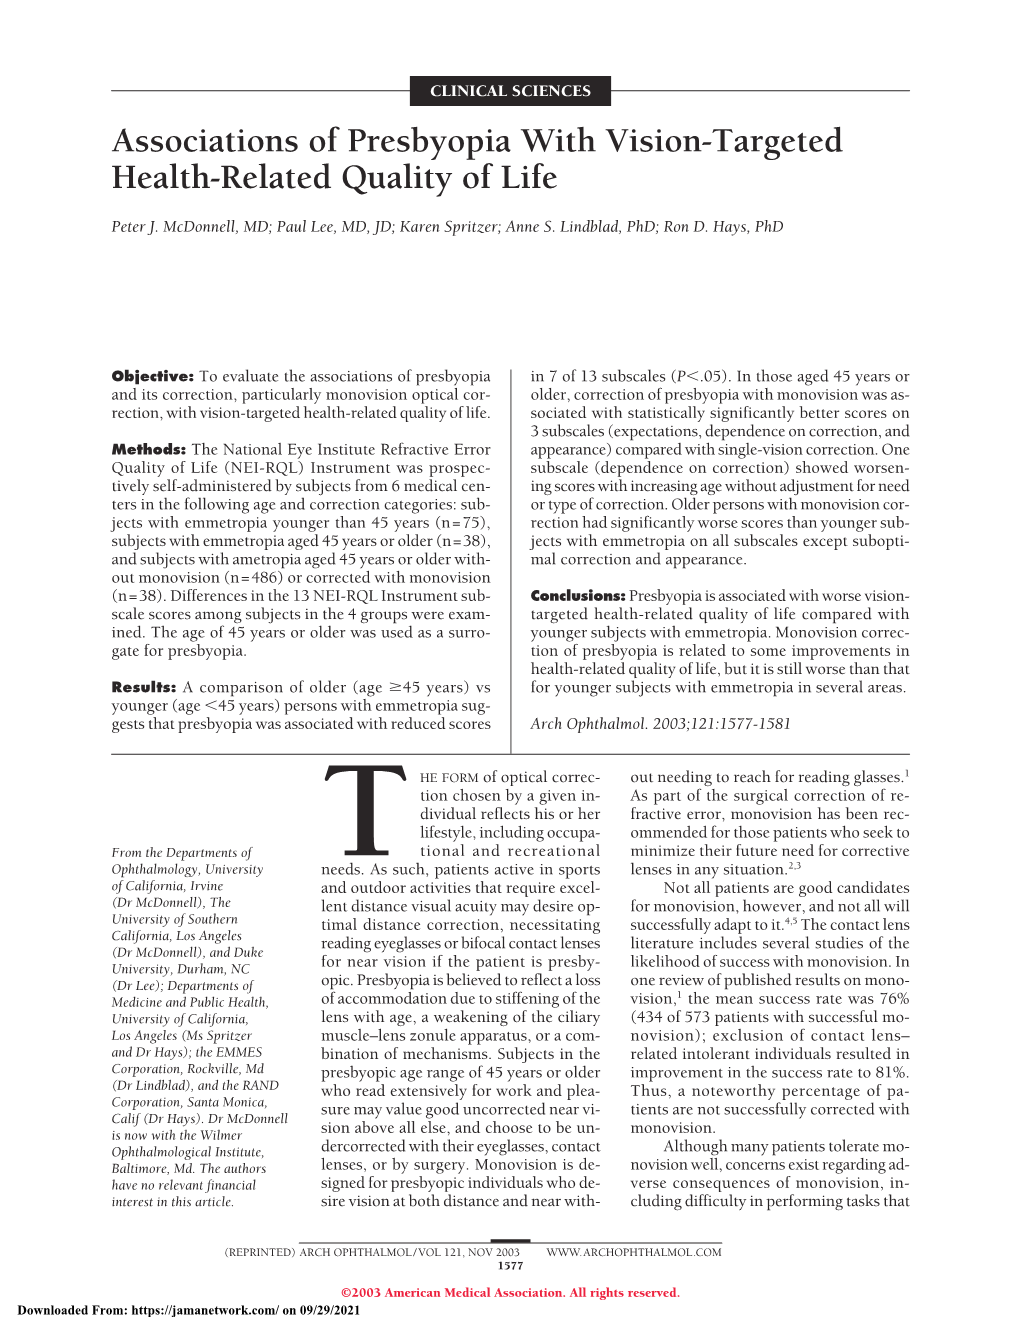 Associations of Presbyopia with Vision-Targeted Health-Related Quality of Life